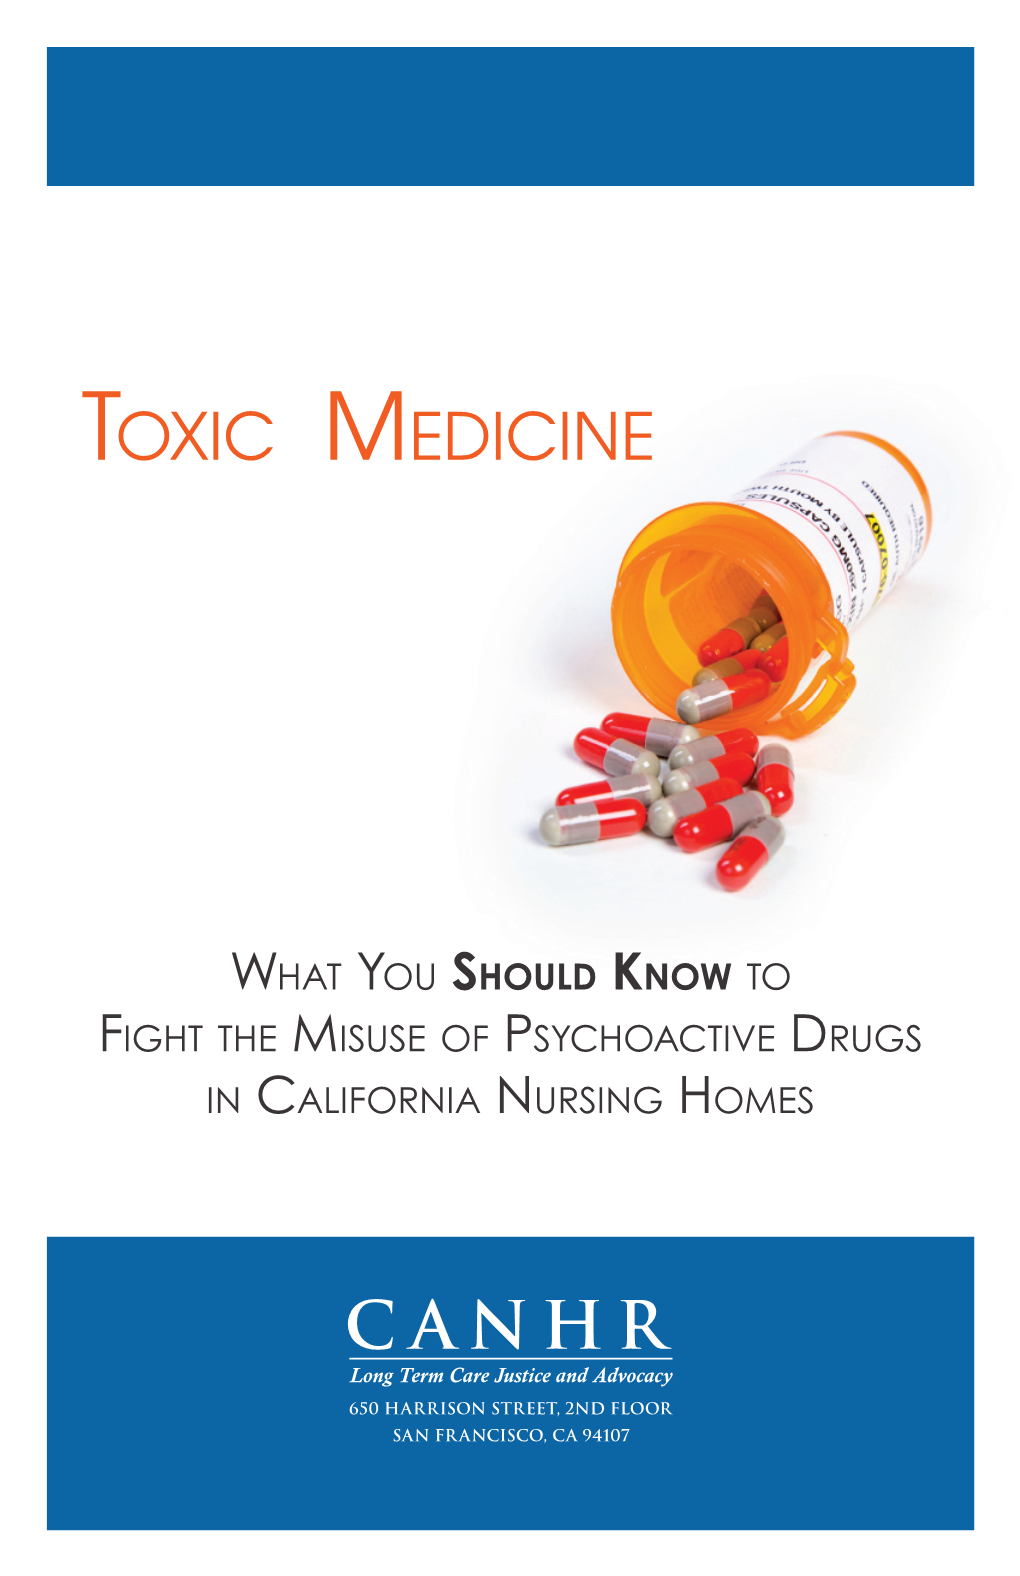 Toxic Medicine: What You Should Know to Fight the Misuse